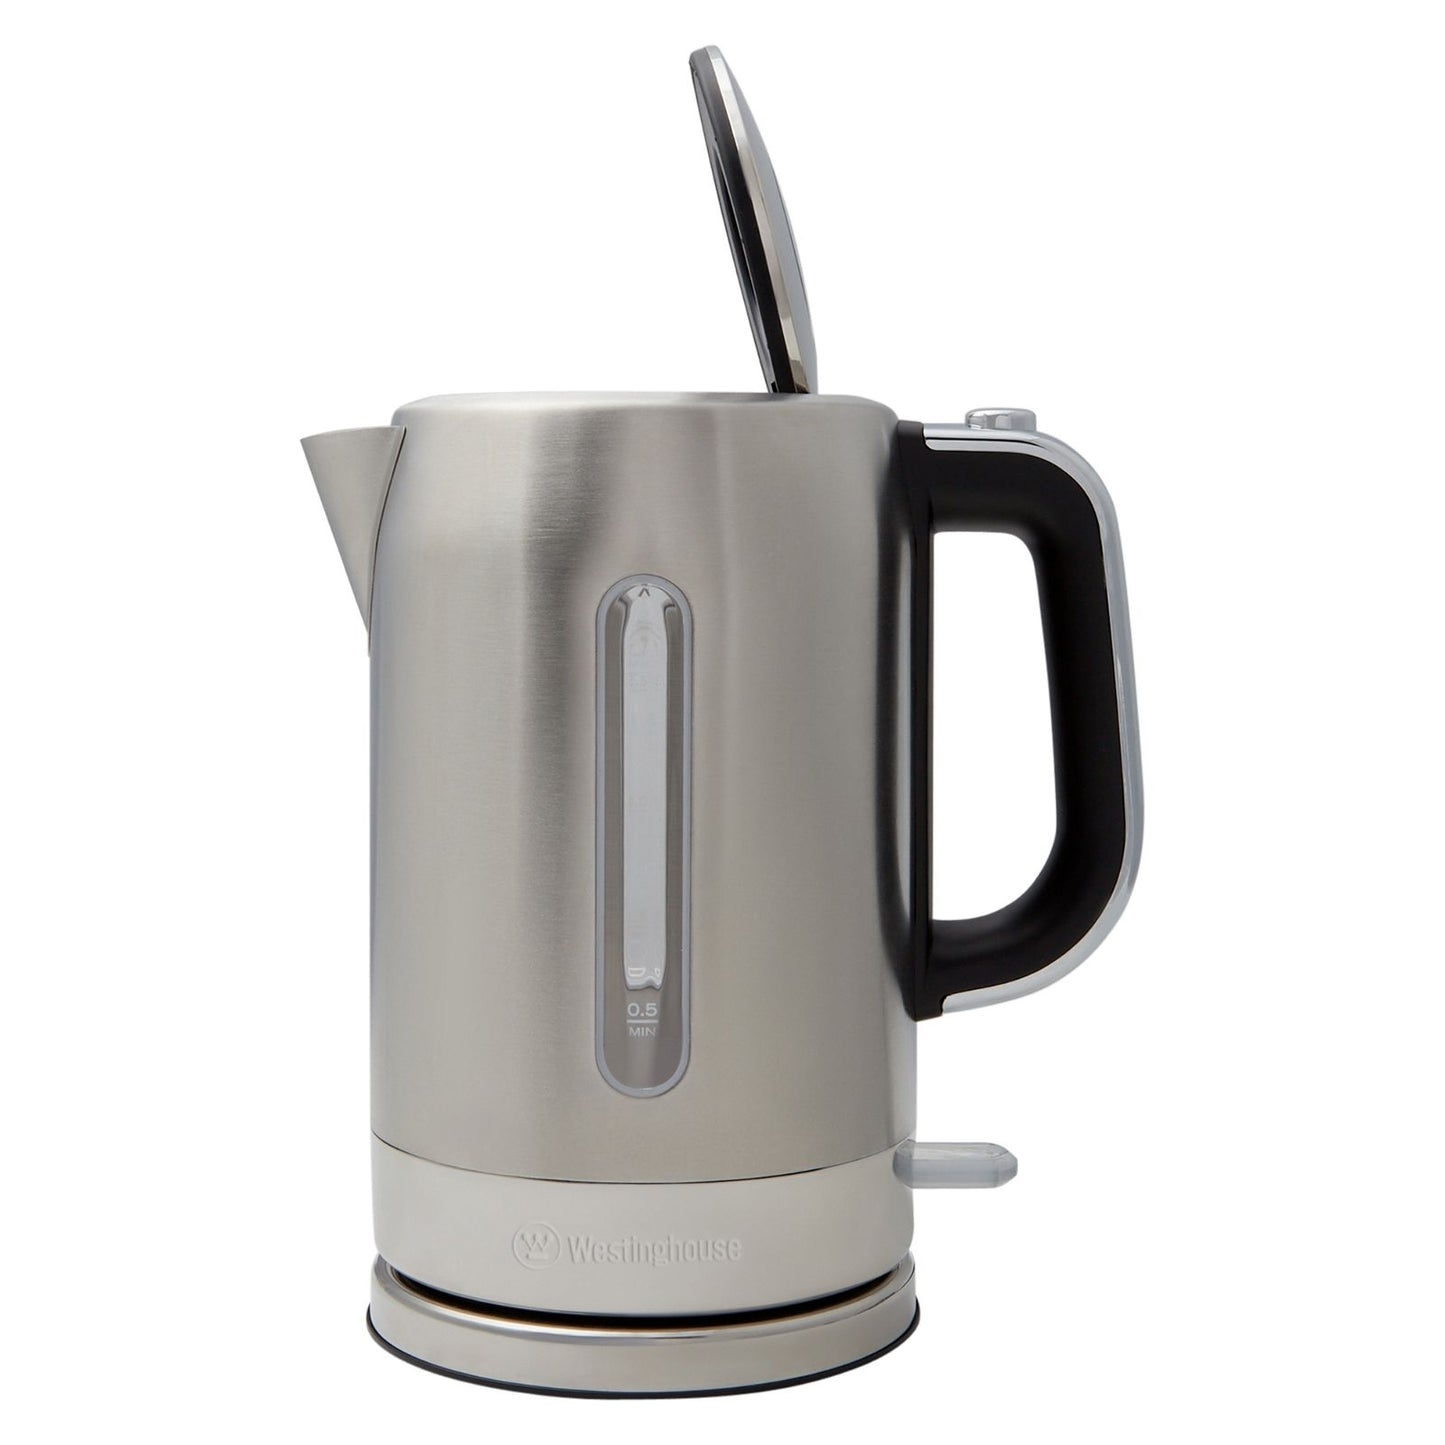 Westinghouse Kettle 1.7L Stainless Steel-#product_category#- Distributed by:  under license